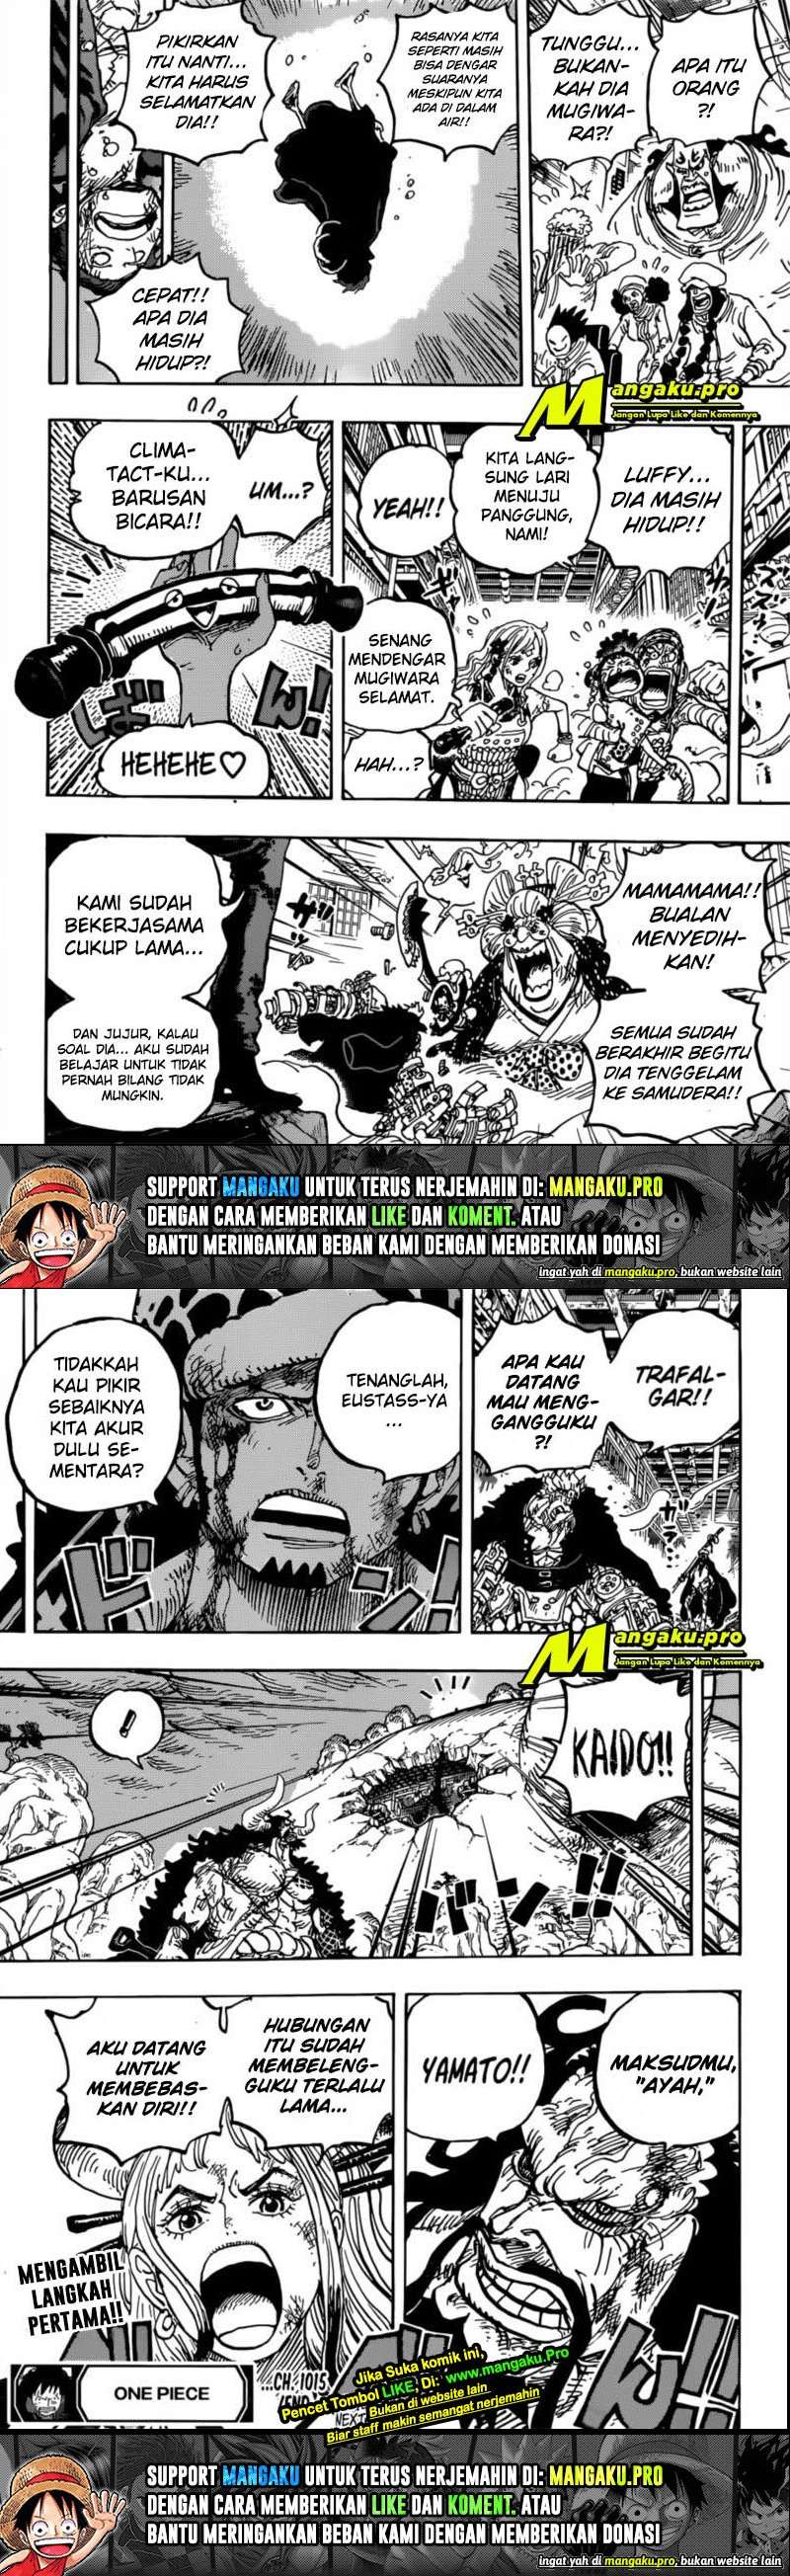 One Piece  Chapter 1015